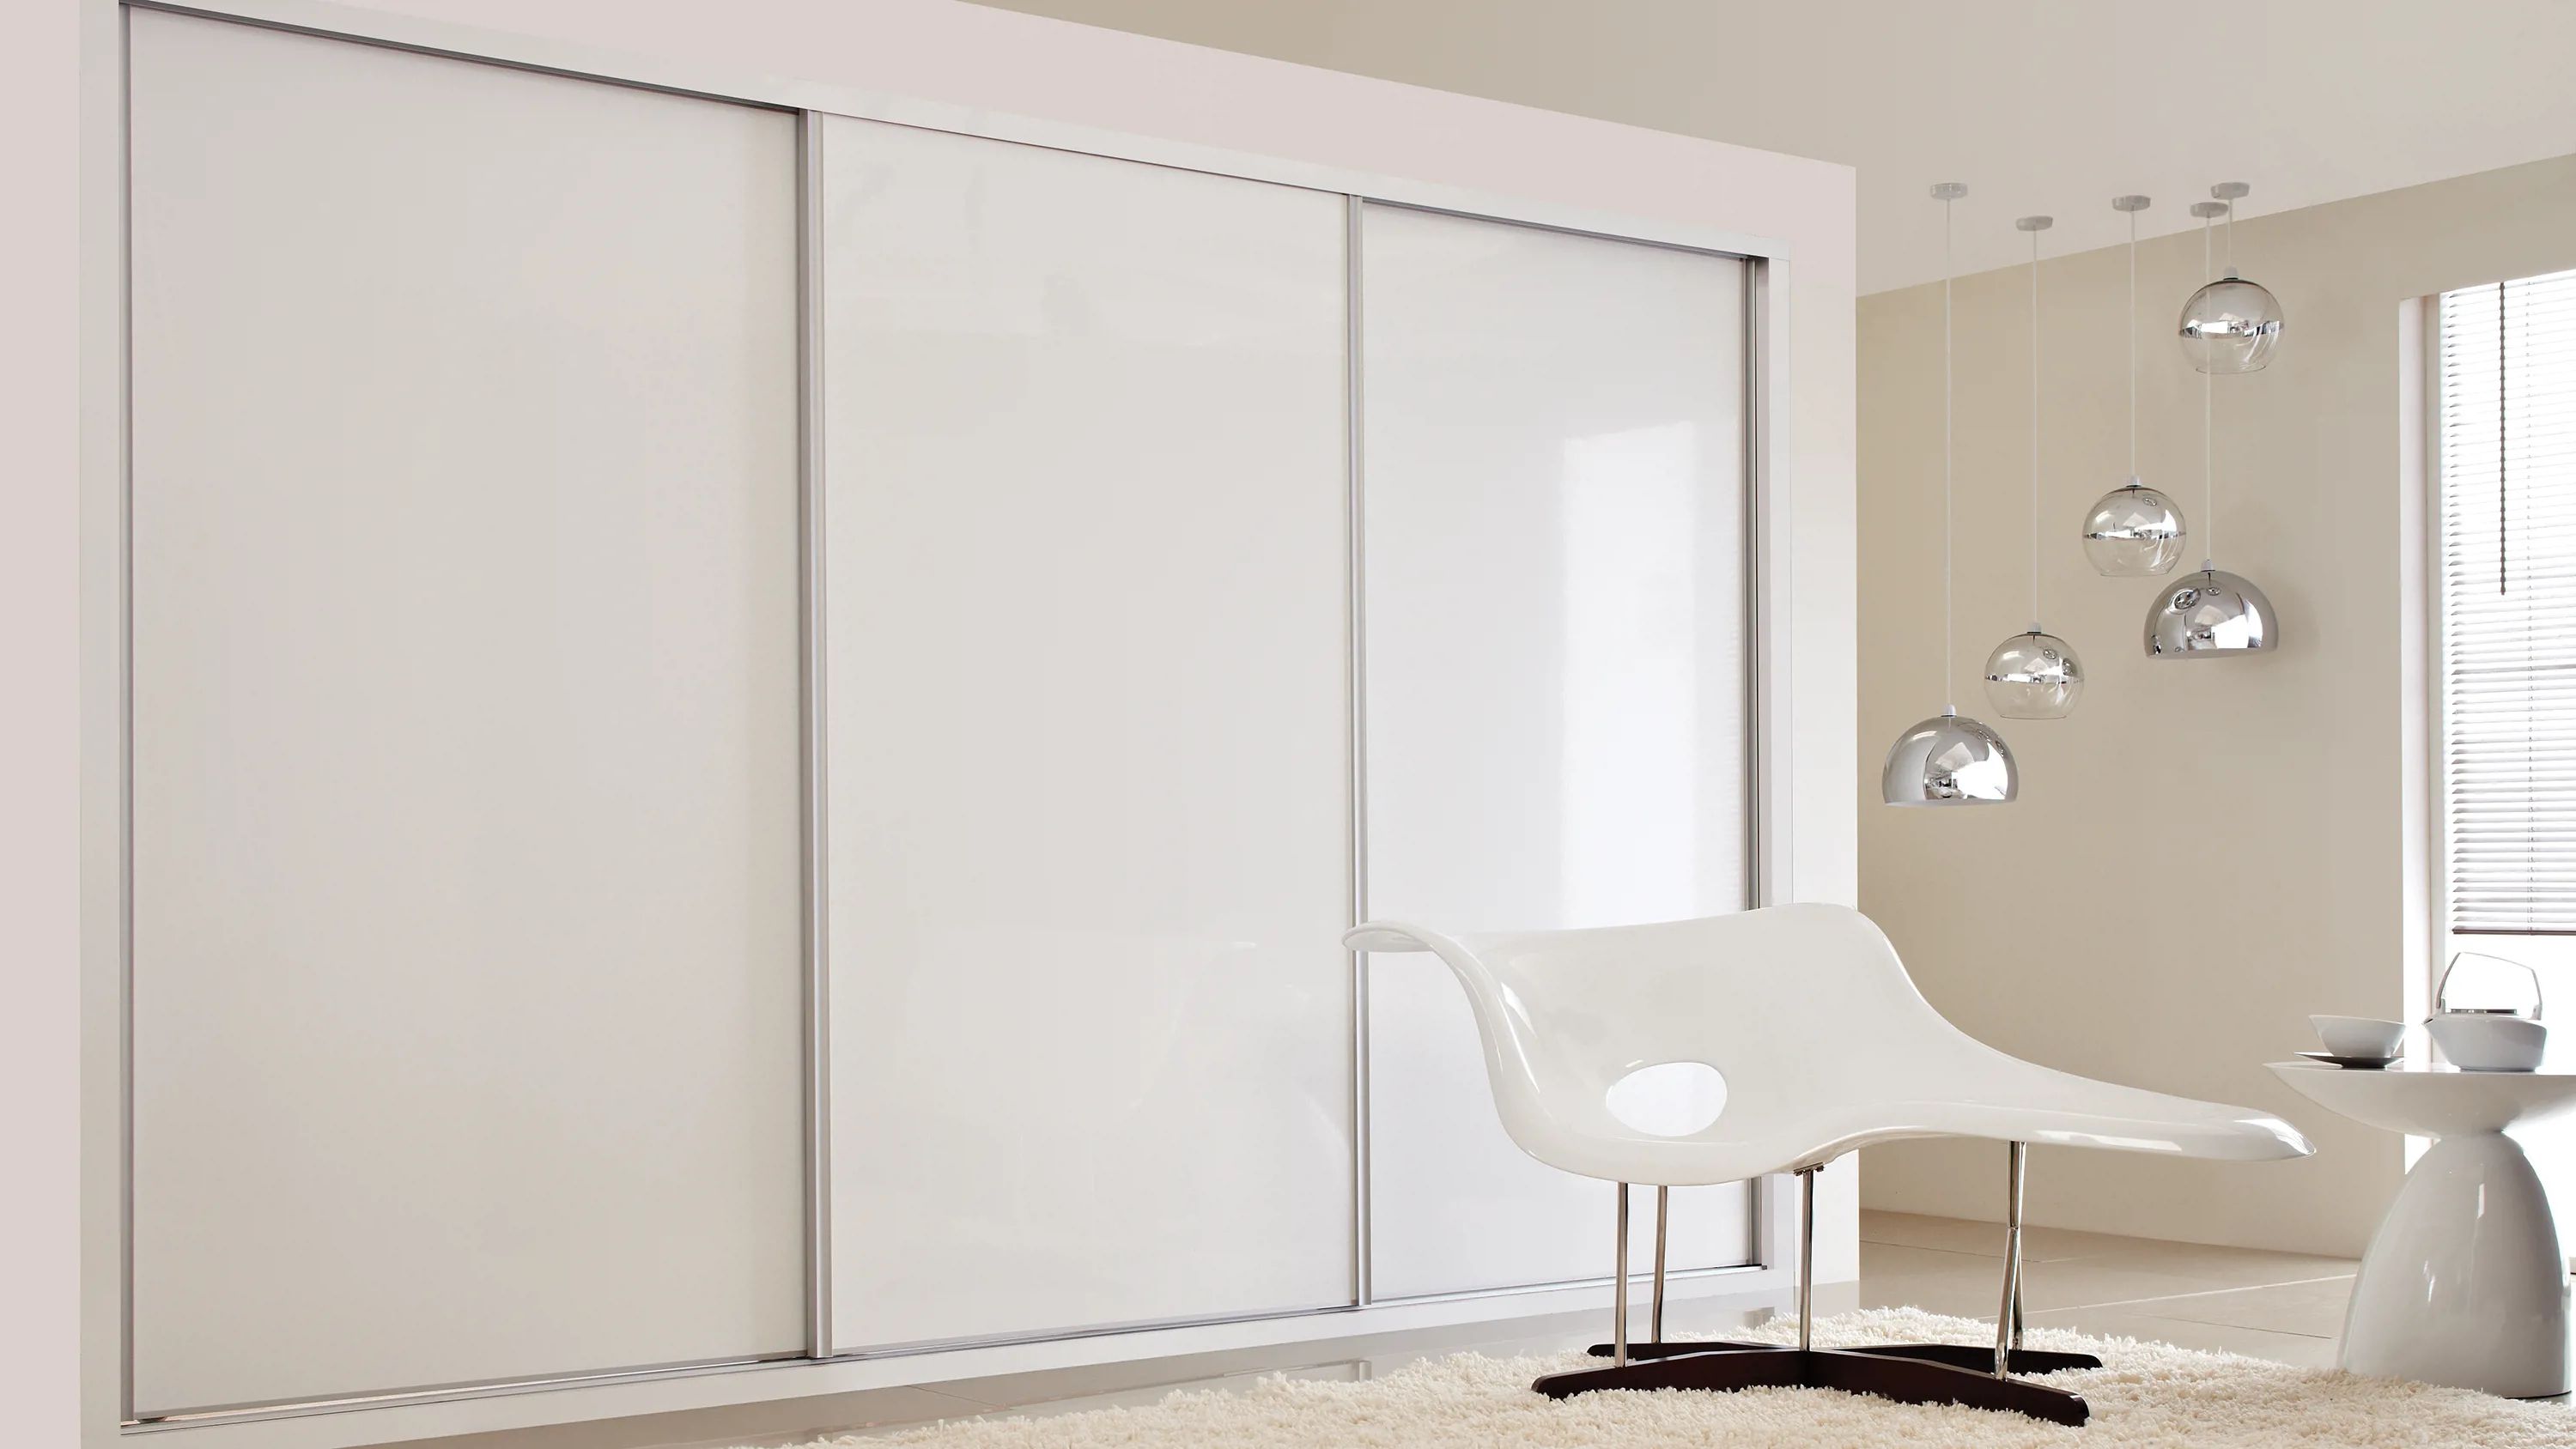 Unearth The High Gloss Fitted Sliding Wardrobes Range For Your Bedroom |  Hammonds Regarding White High Gloss Sliding Wardrobes (Photo 10 of 15)